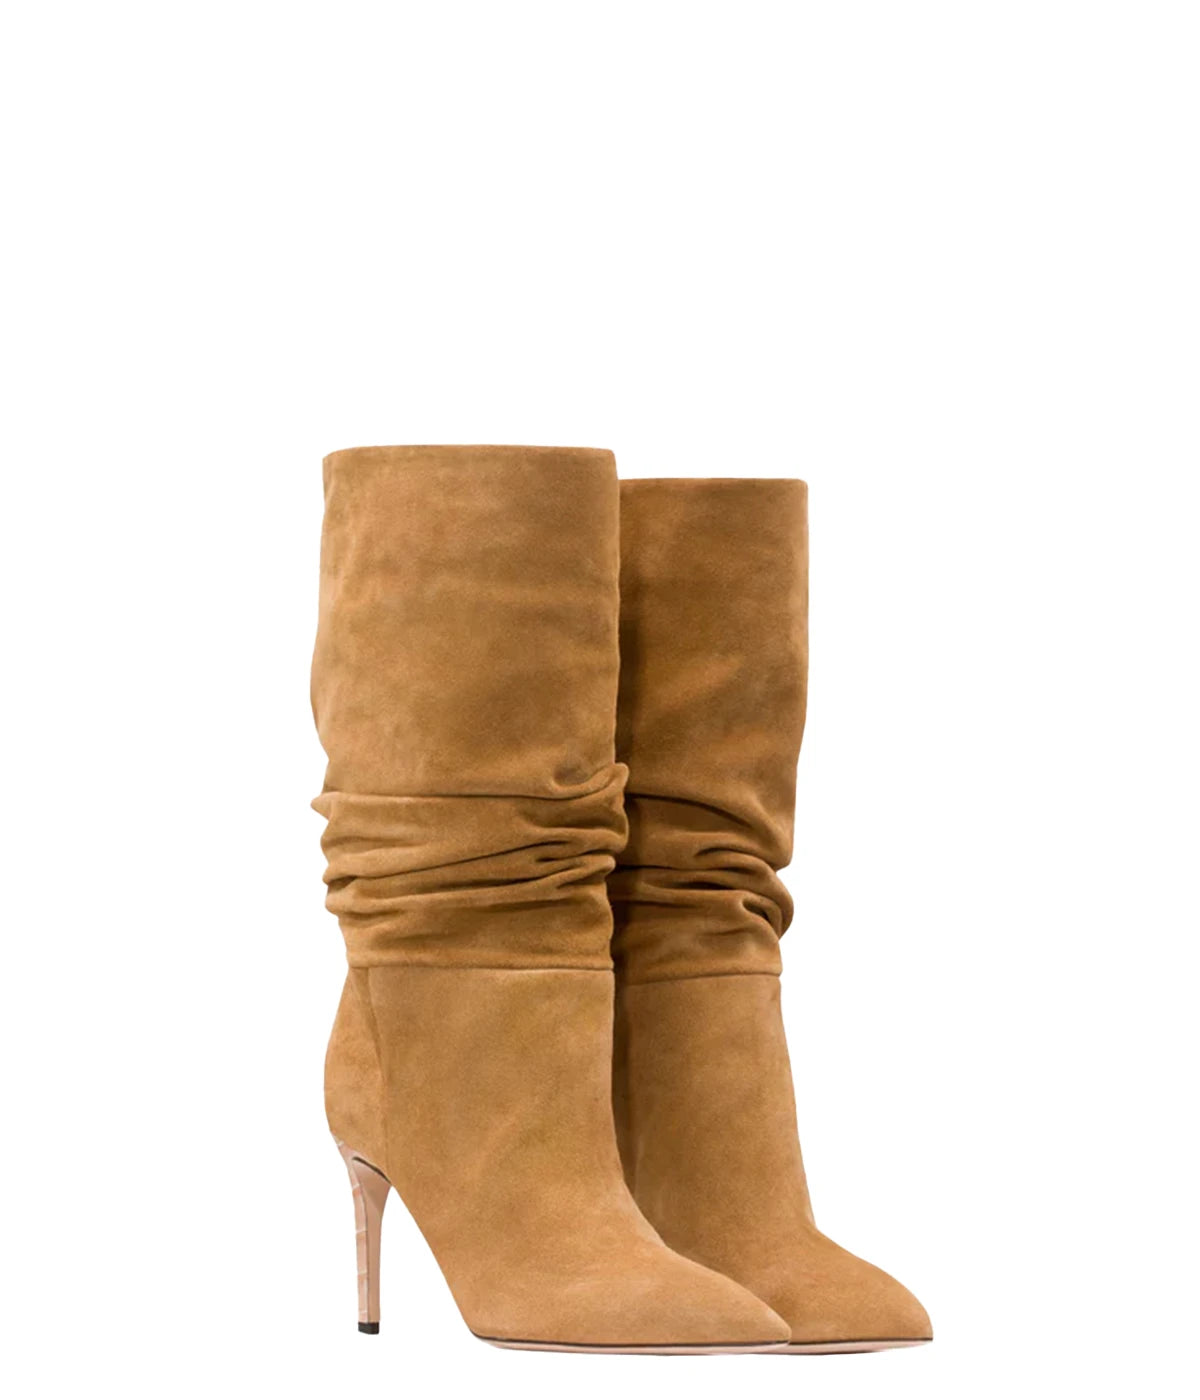 Slouchy Boot 85 in Caramel